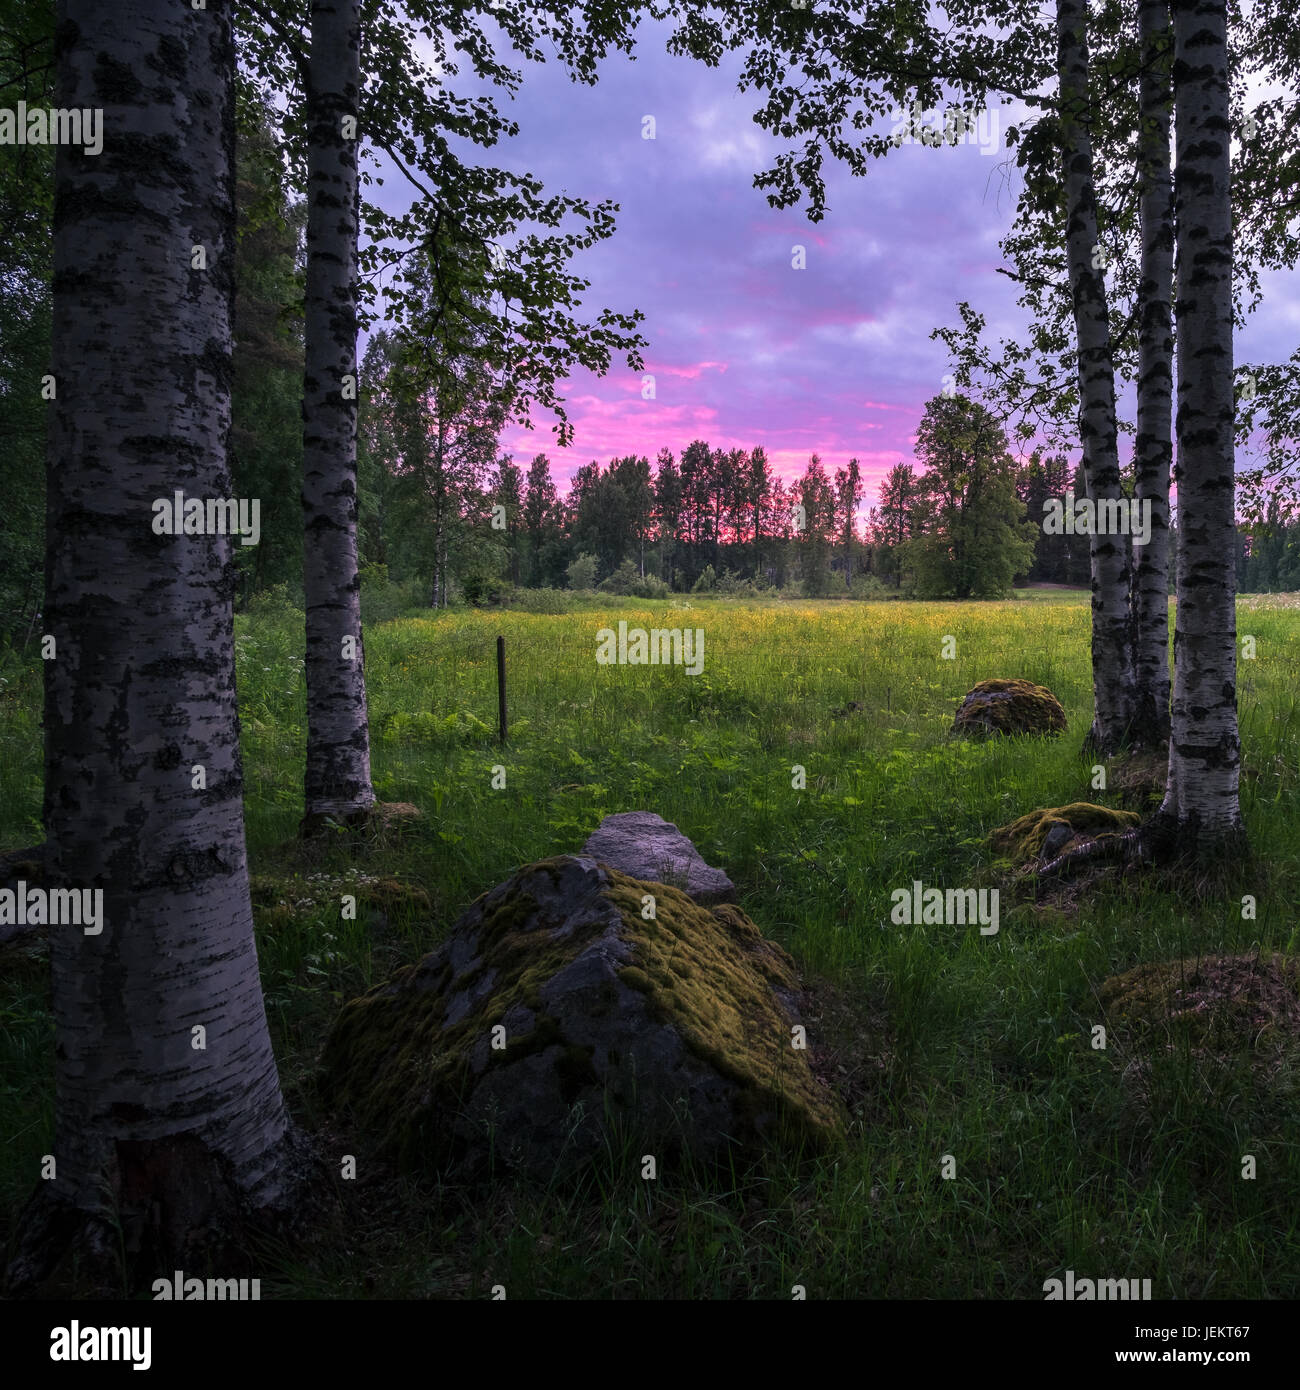 Countryside landscape at summer night with colorful sunset in Finland Stock Photo